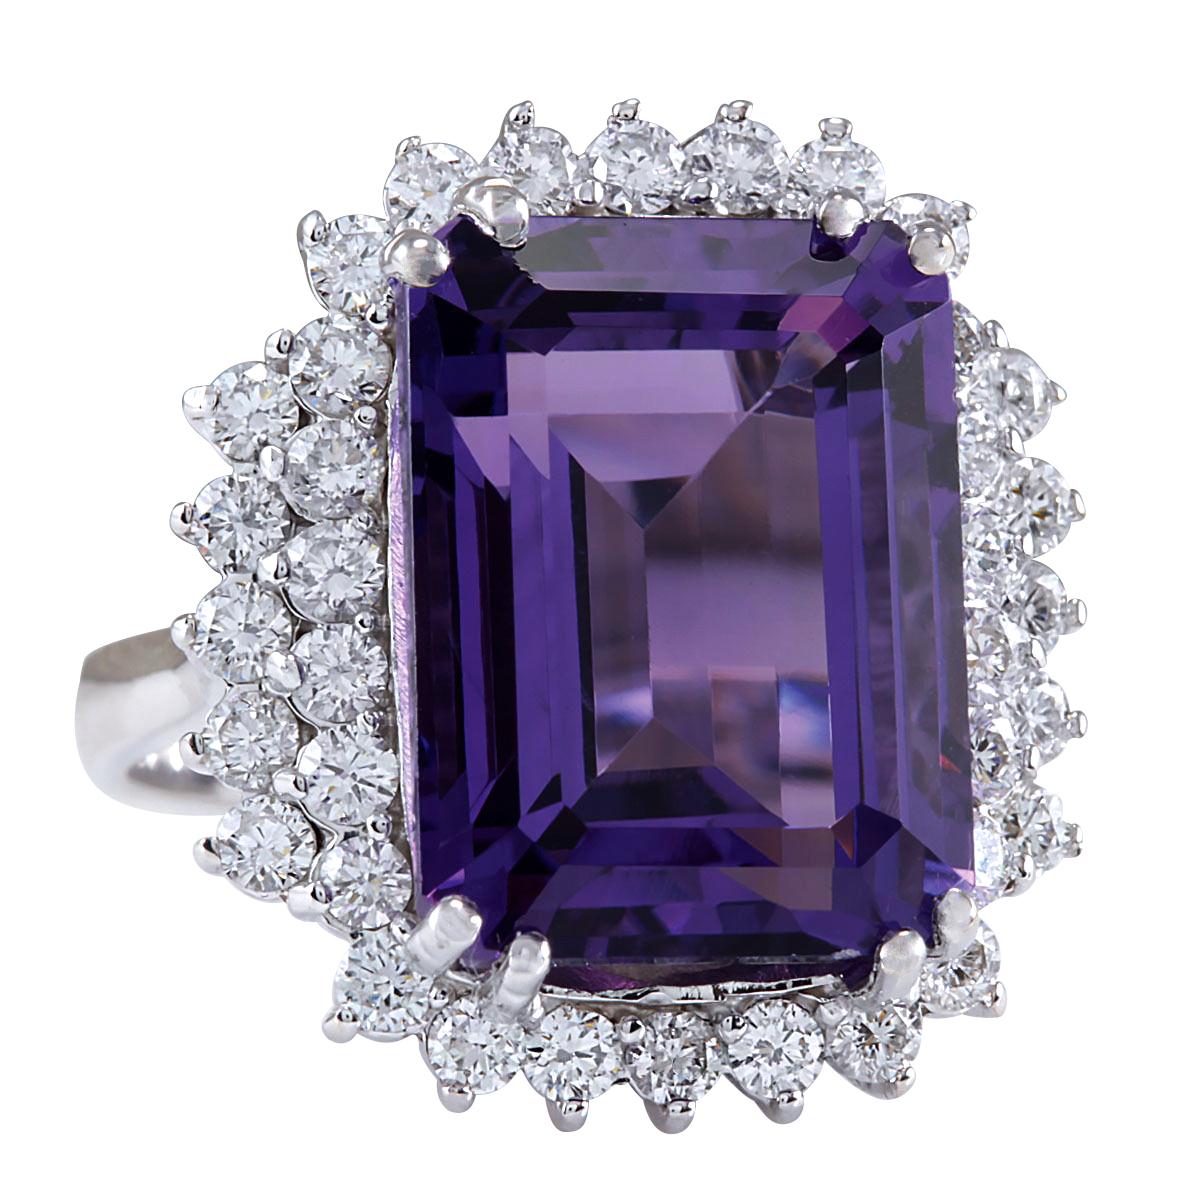 15.12 Carat Natural Amethyst 14 Karat White Gold Diamond Ring
Stamped: 14K White Gold
Total Ring Weight: 8.0 Grams
Amethyst Weight is 13.82 Carat (Measures: 16.00x12.00 mm)
Diamond Weight is 1.30 Carat
Color: F-G, Clarity: VS2-SI1
Face Measures: